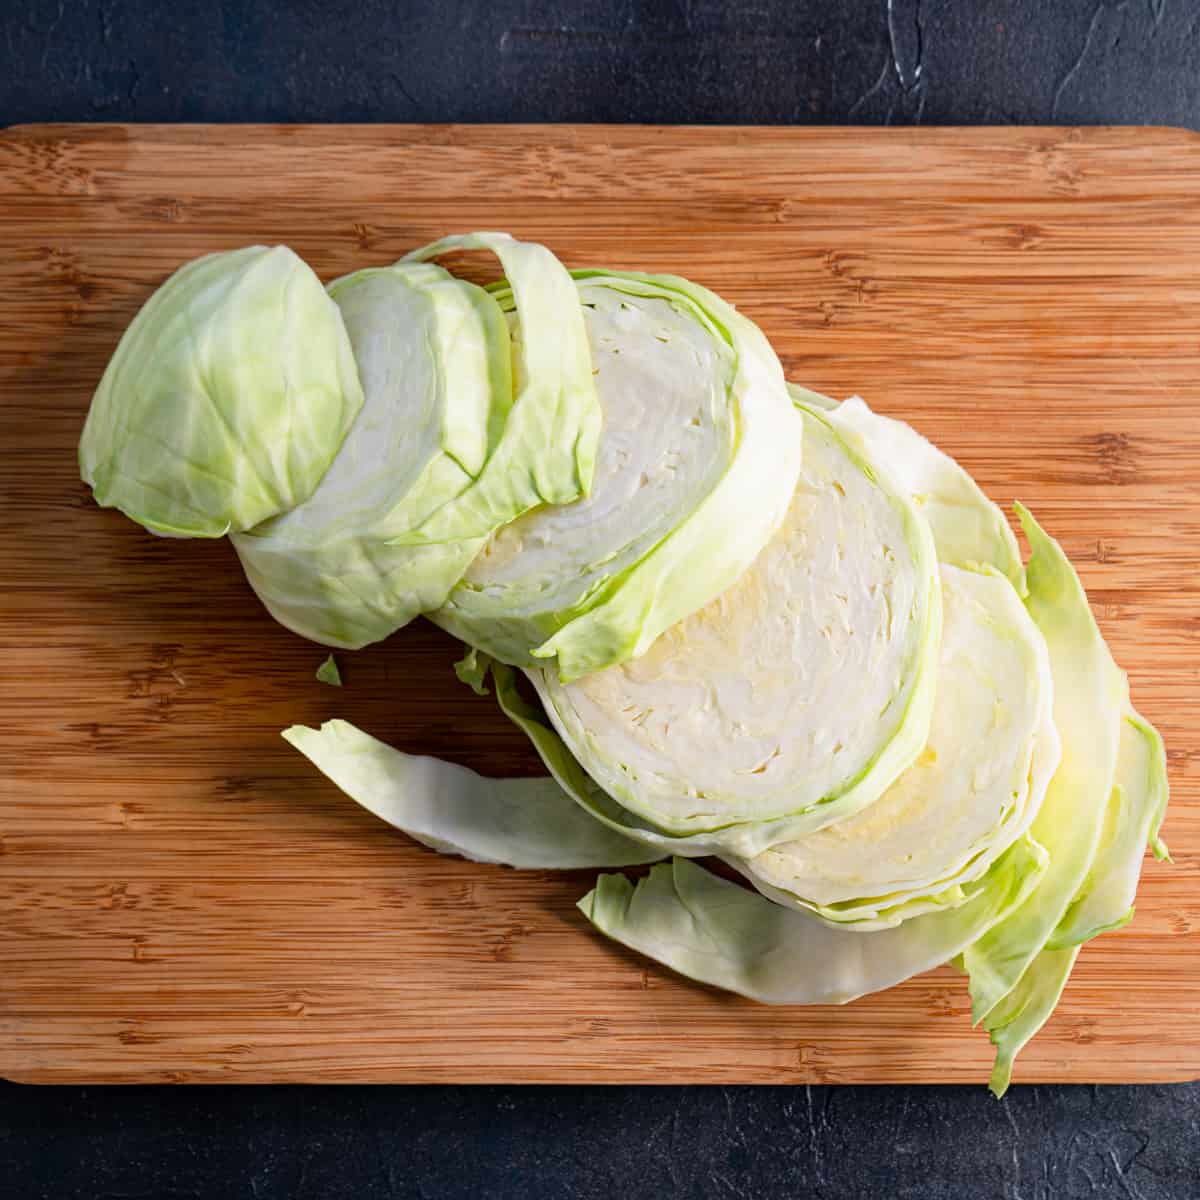 1 large head of cabbage sliced into steaks.